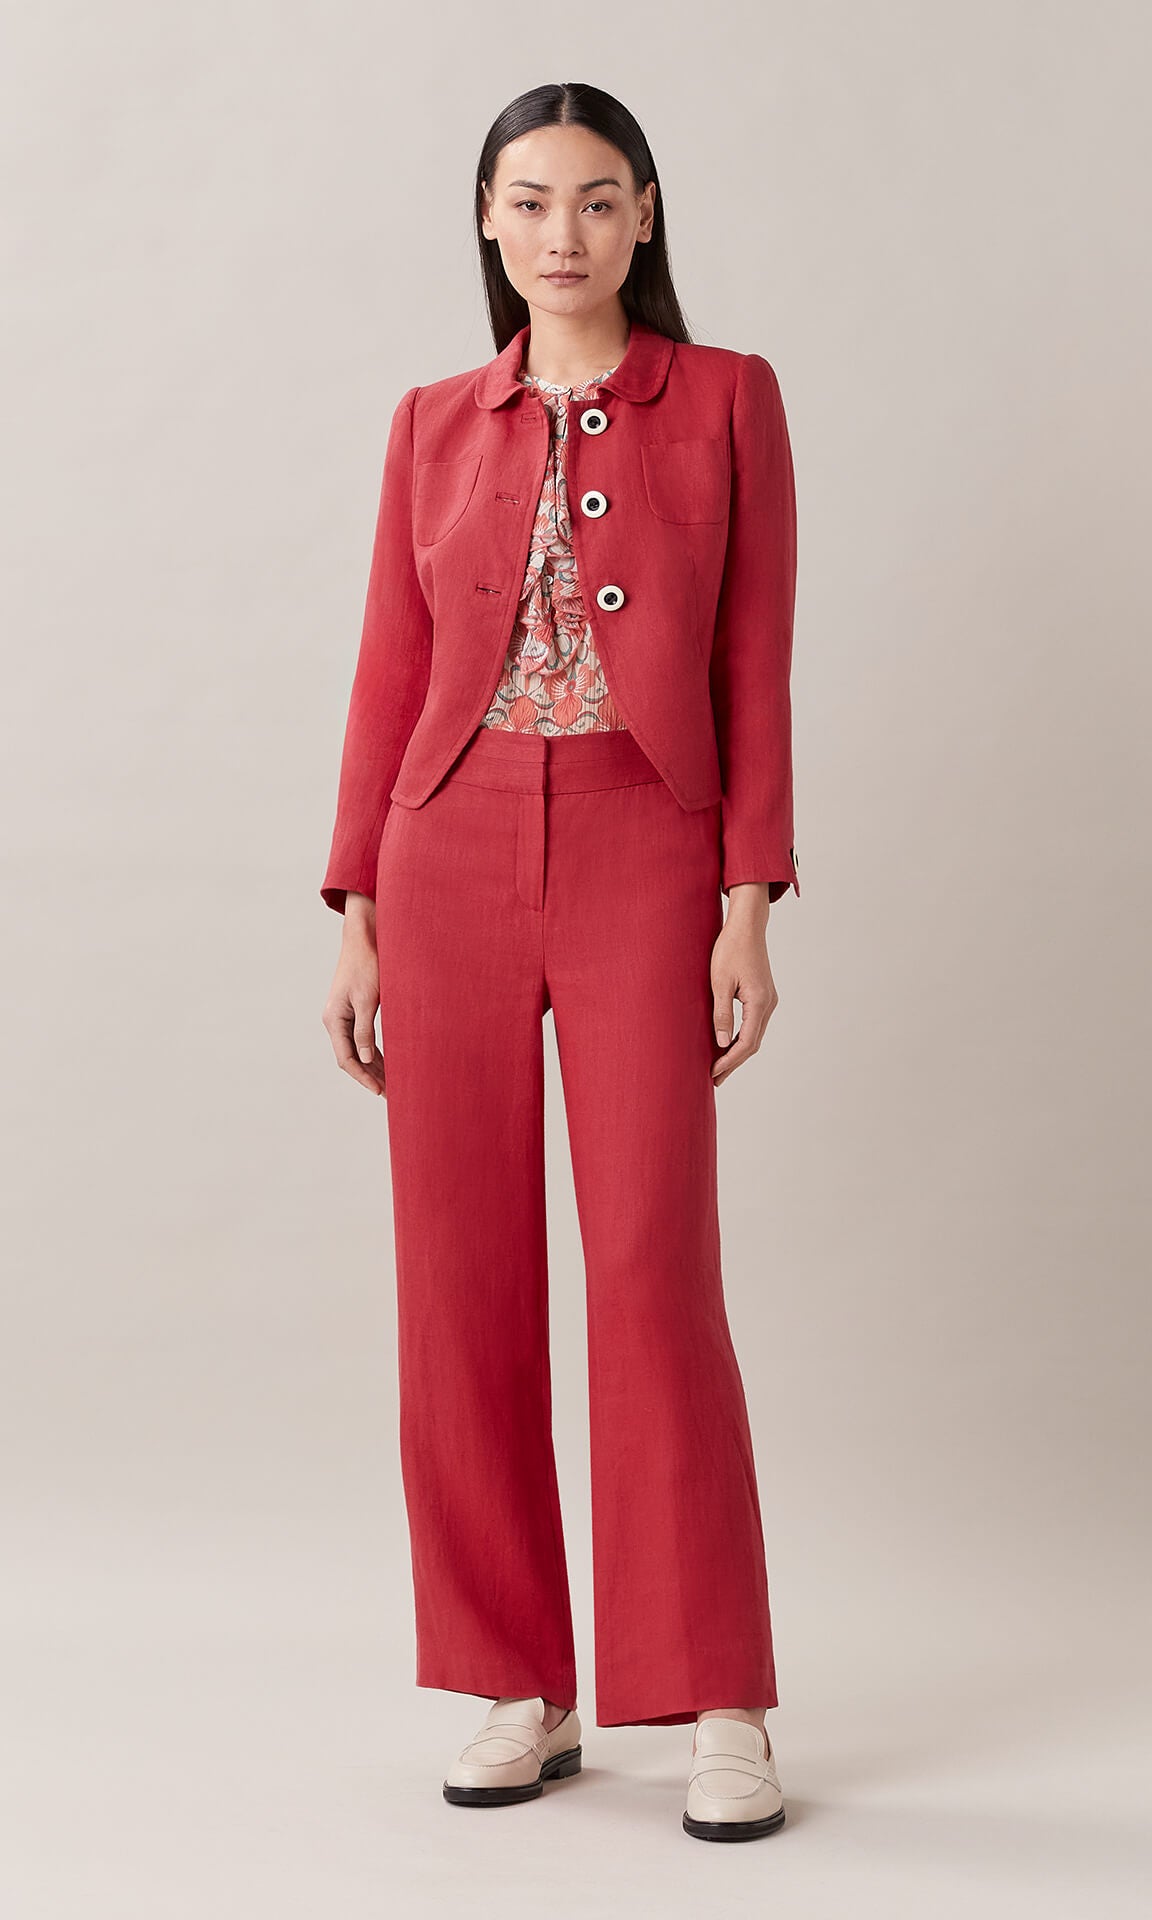 Women's Red Suits, Made to Measure